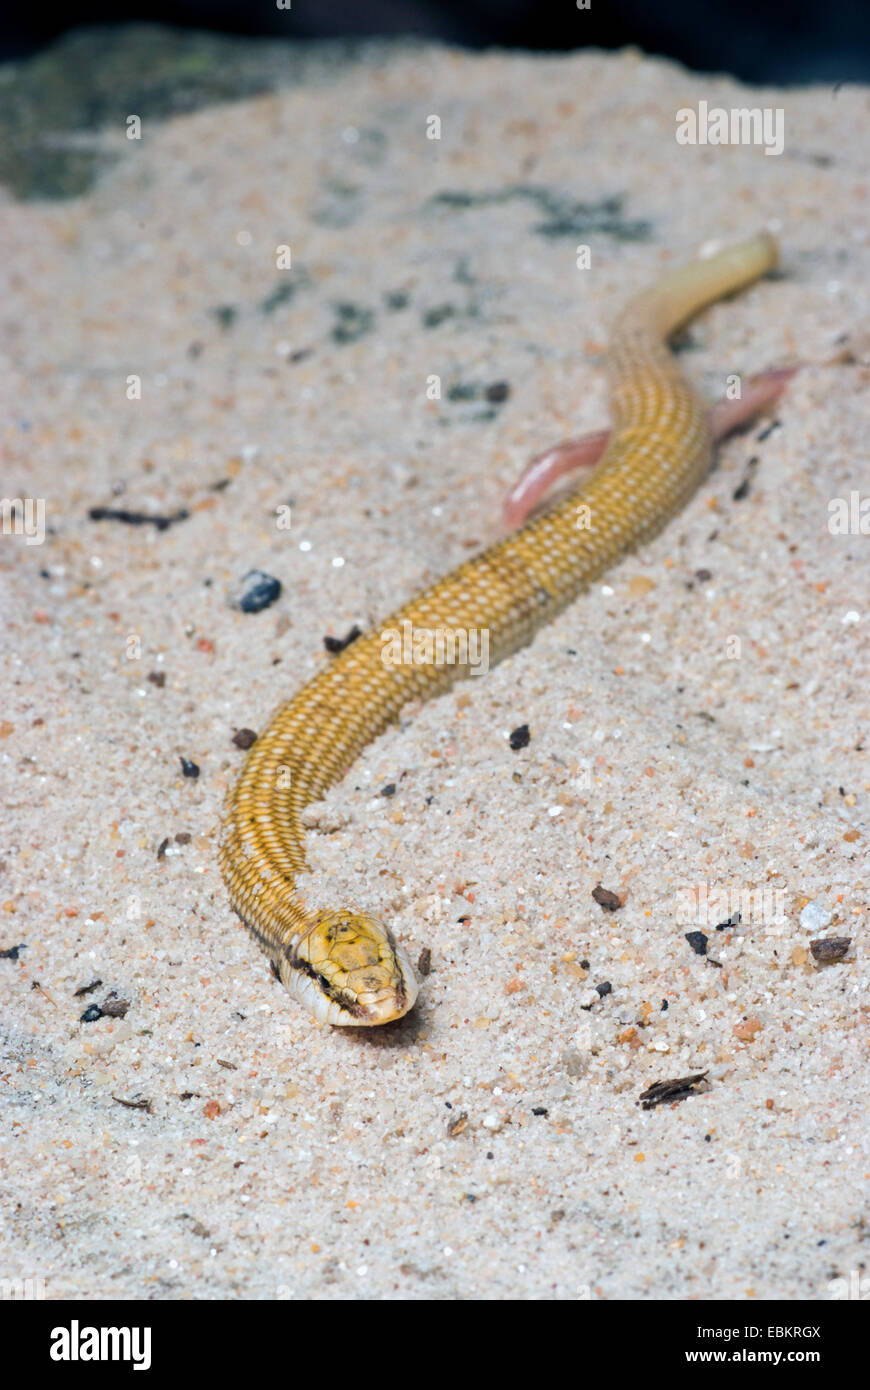 Wedge-snouted skink, Elongated barrel skink (Chalcides sepsoides), creeping Stock Photo